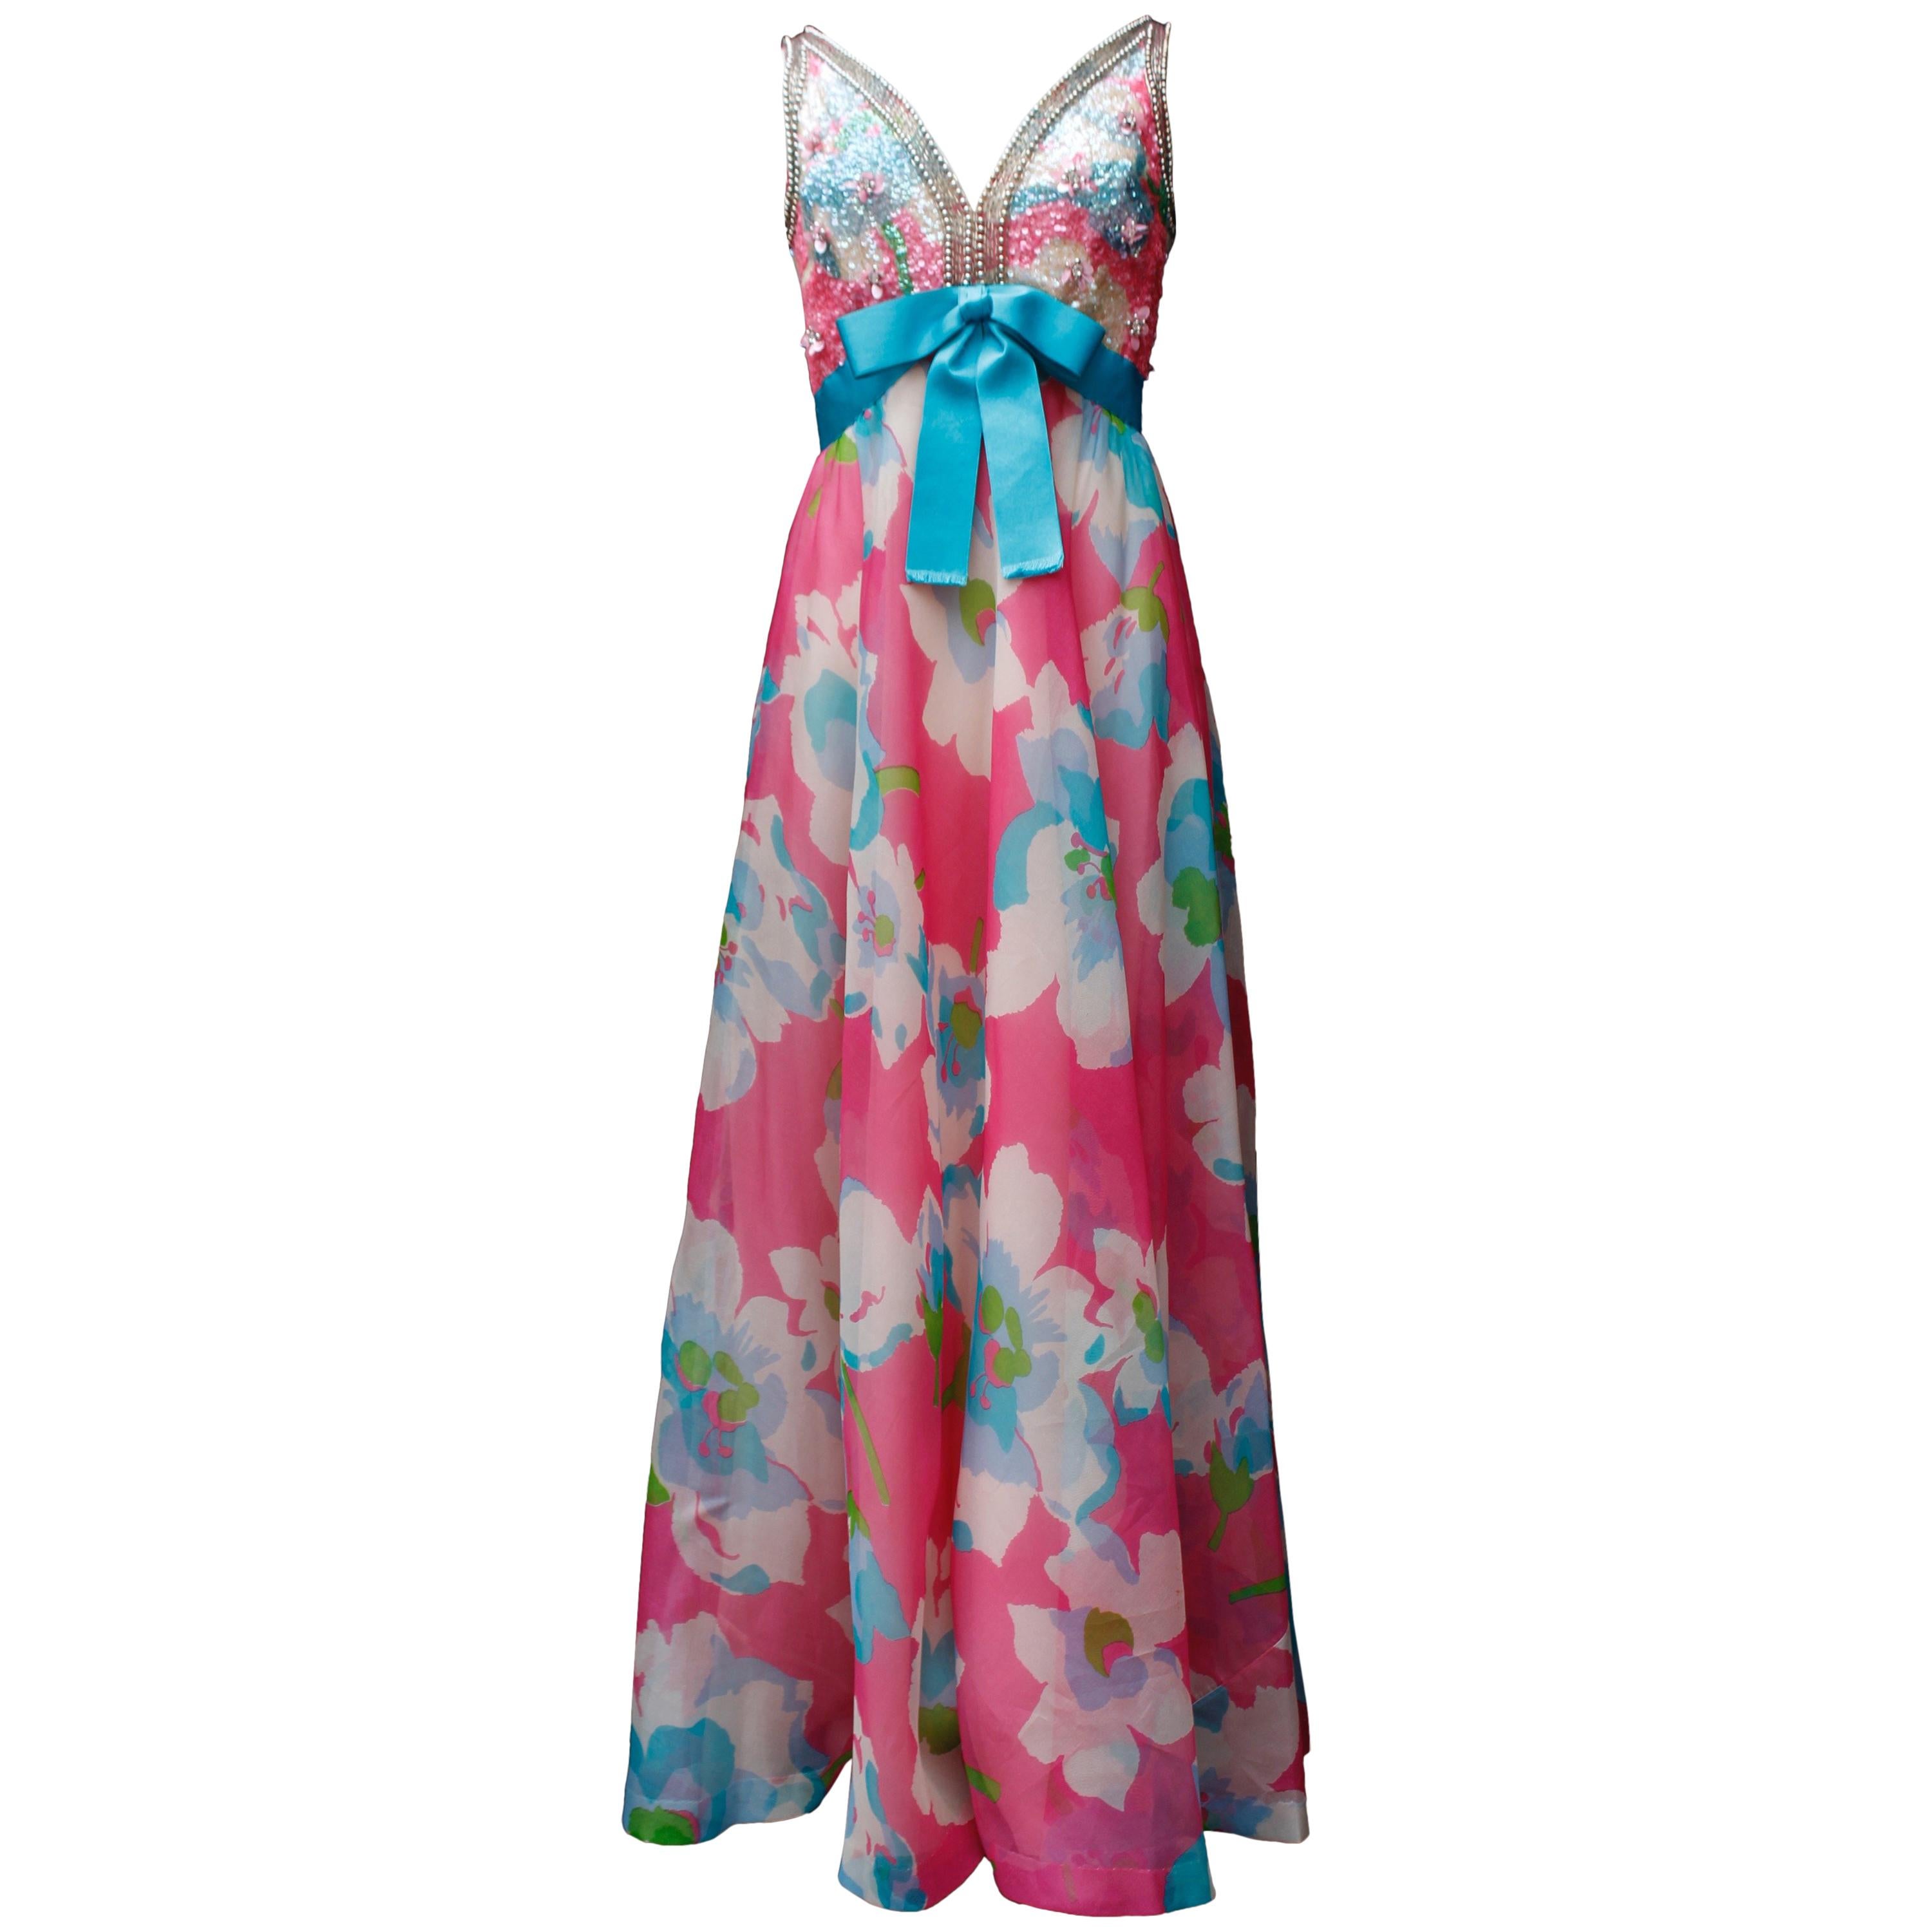 Jean Patou lovely long taffeta summer dress with floral pattern For Sale